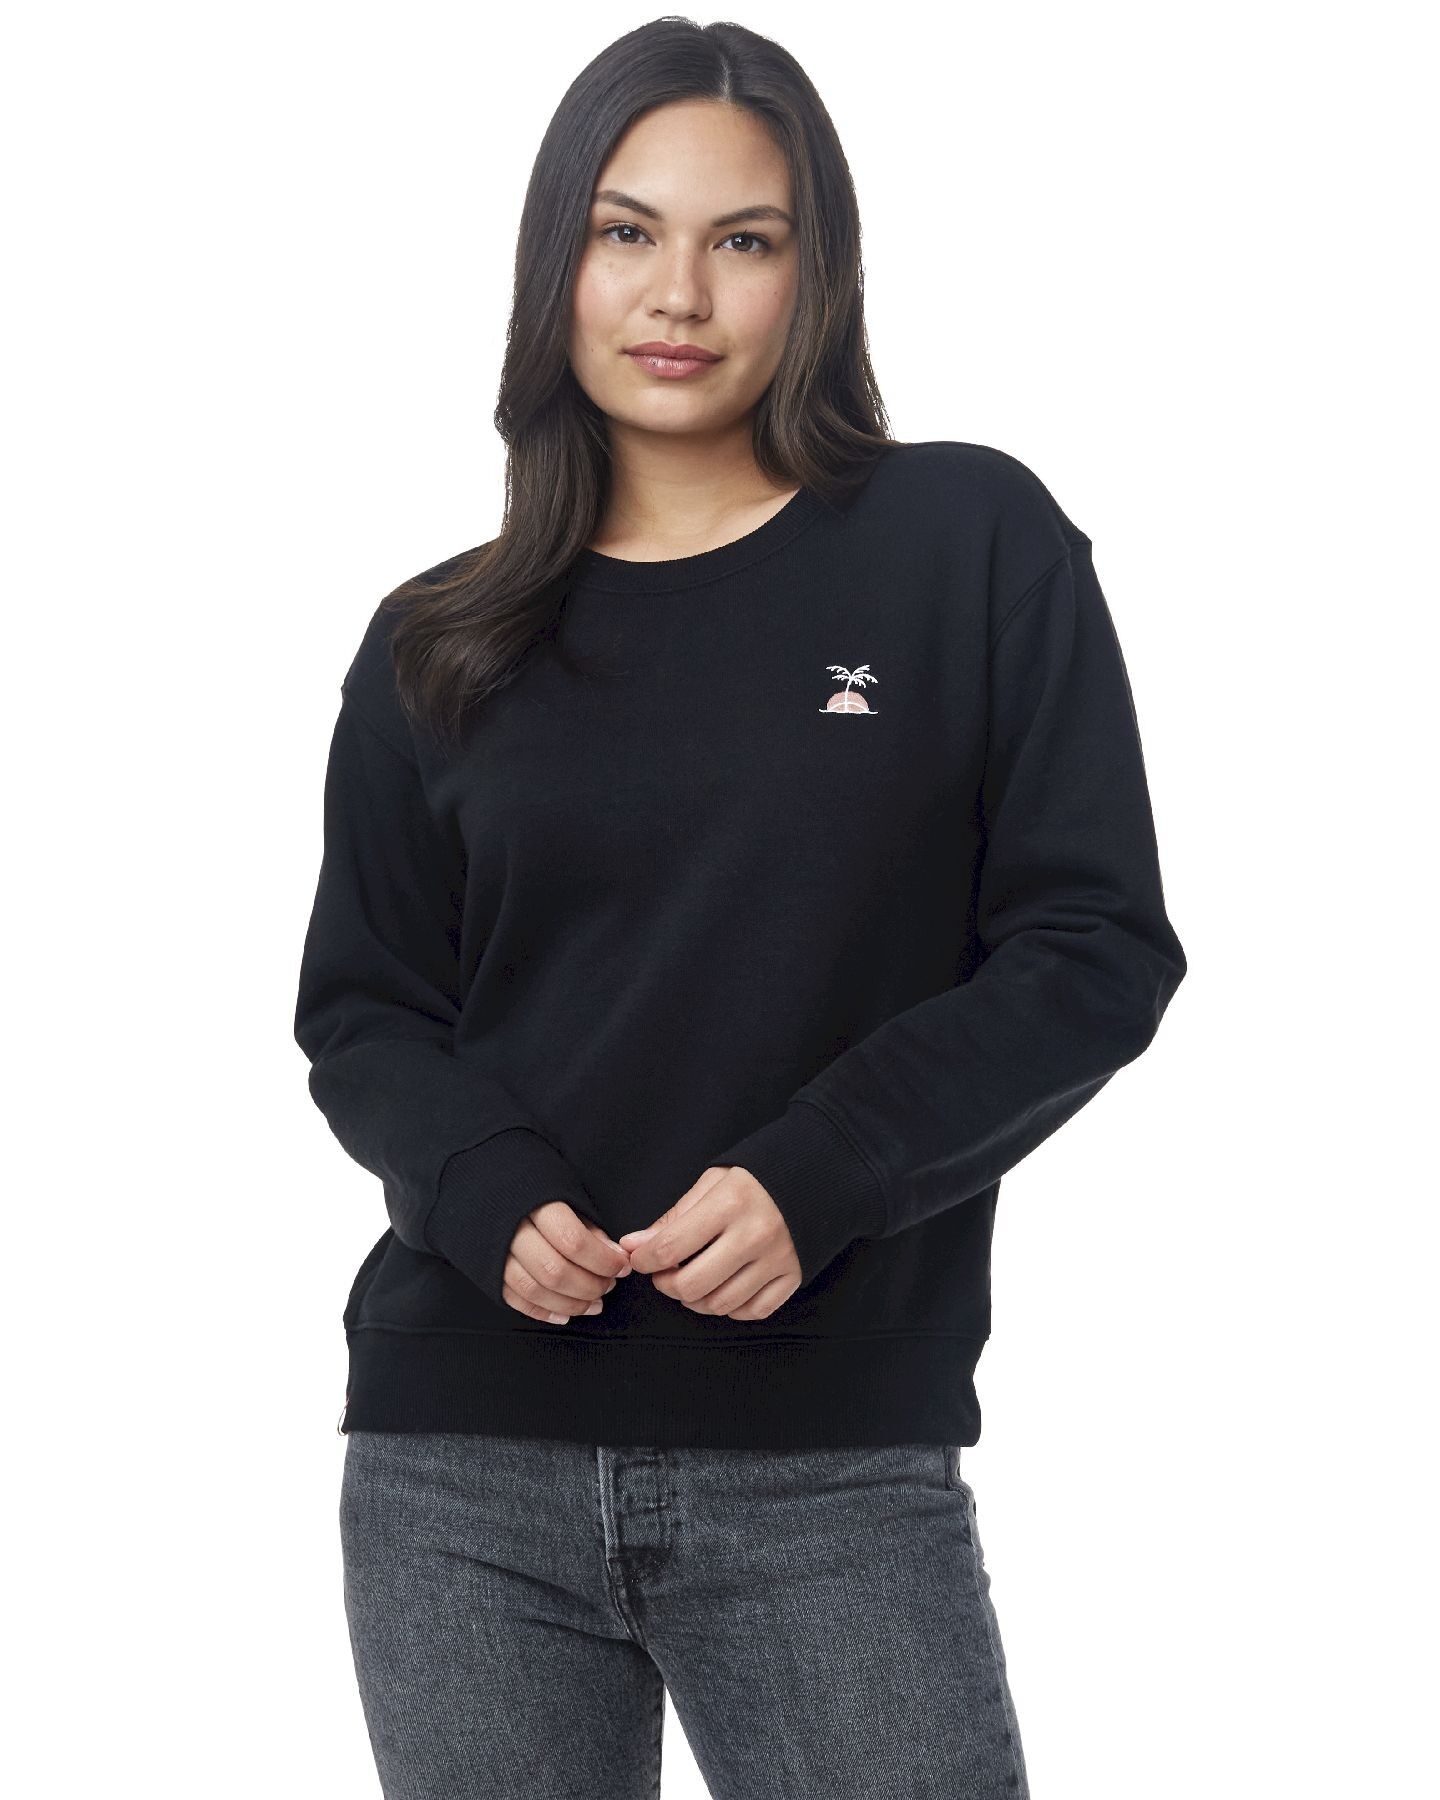 Tentree Palm Sunset Embroidery Crew - Jumper - Women's